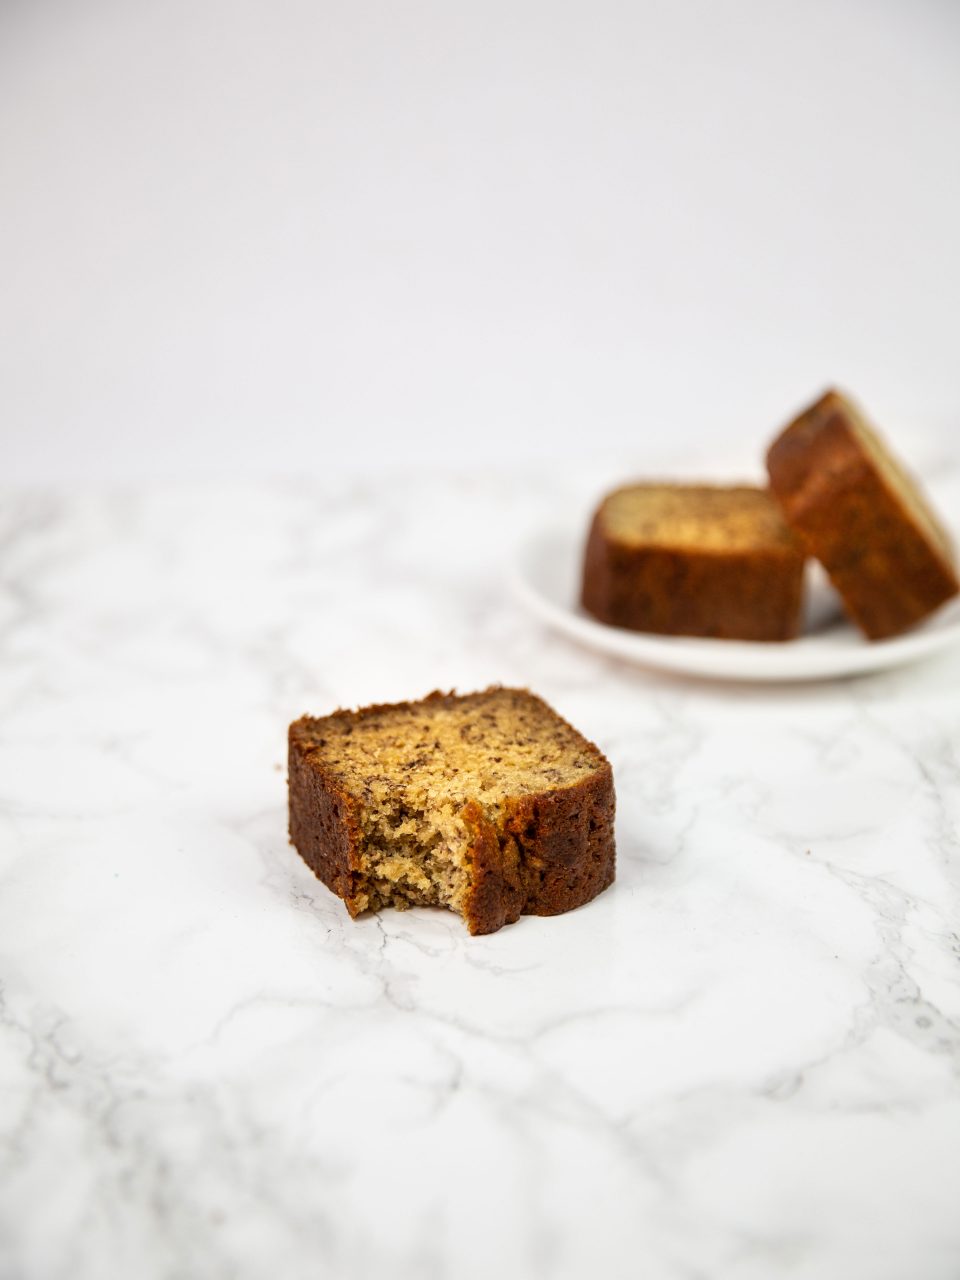 Online Cake Delivery Malaysia - Banana Loaf